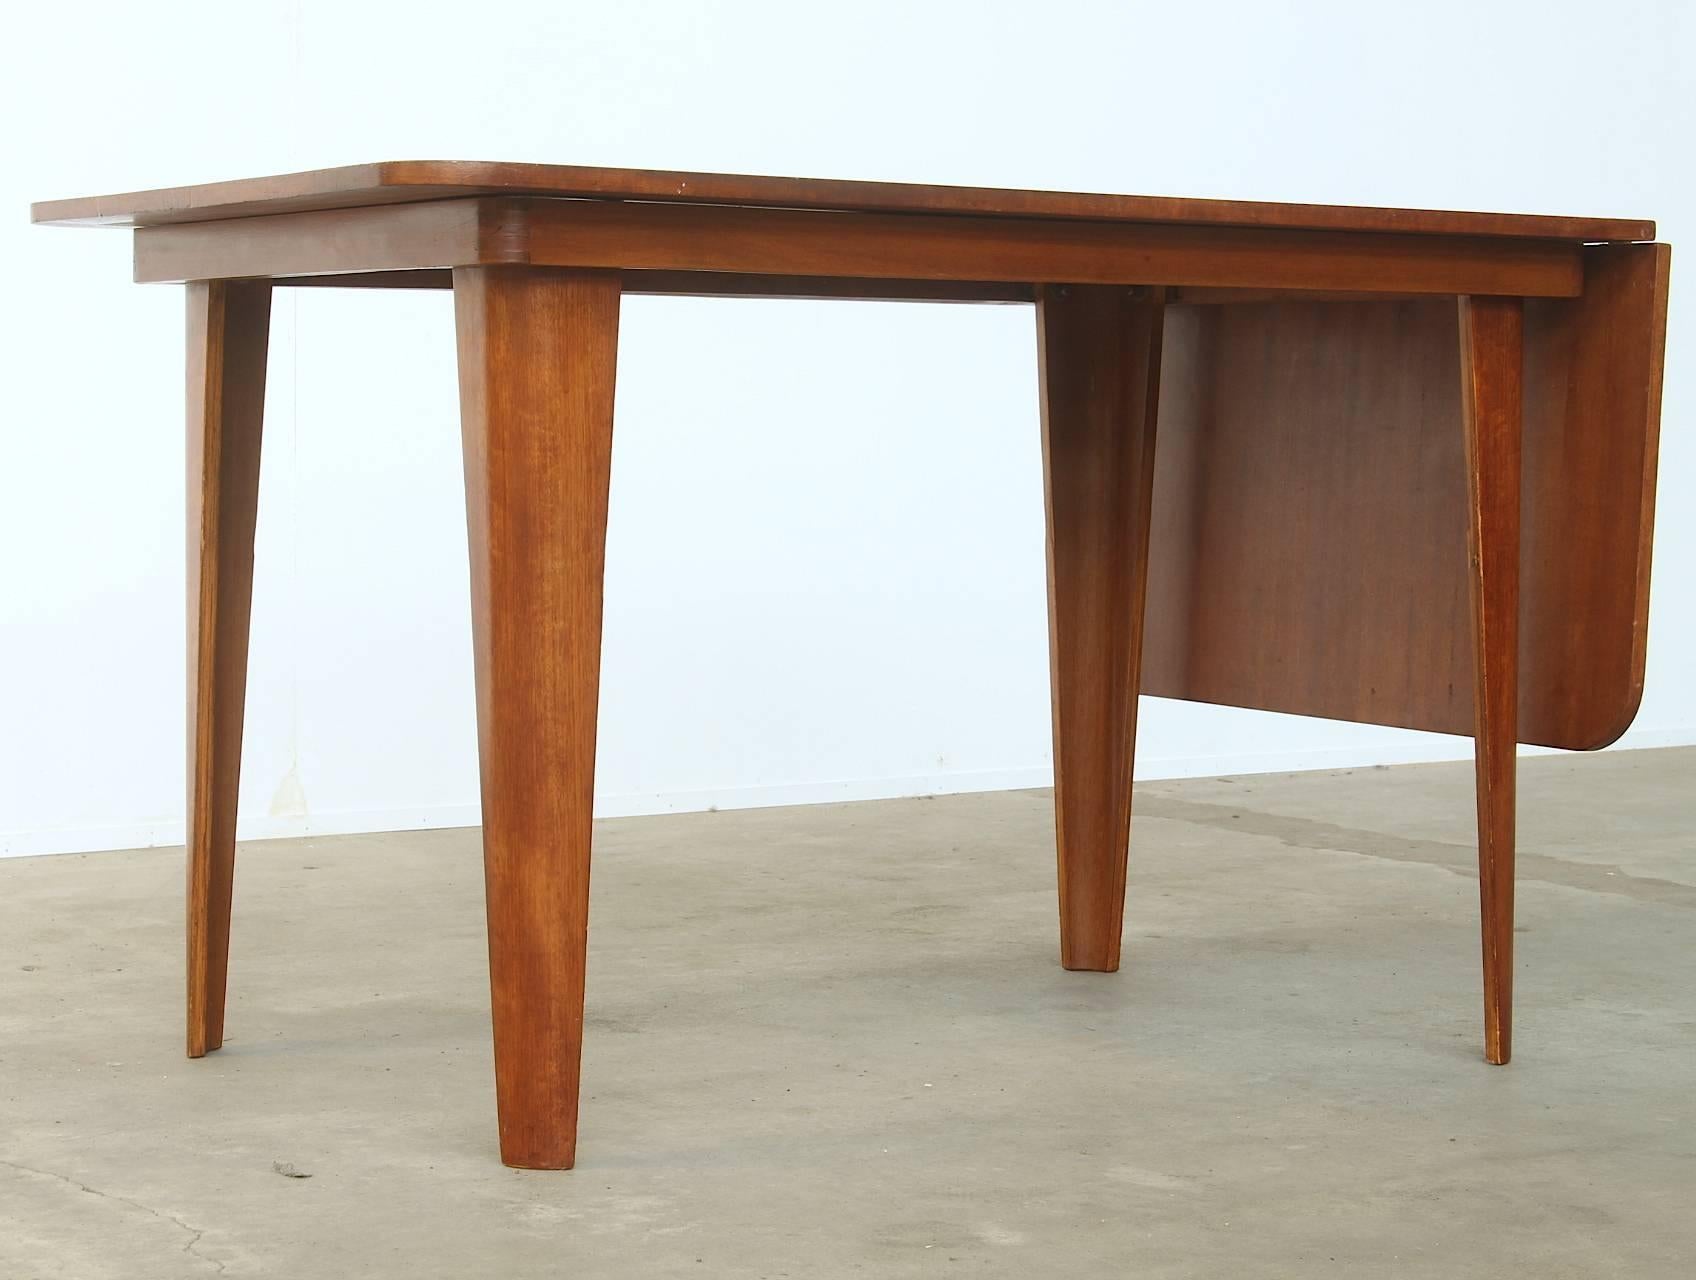 Very rare extendable dining table by Cor Alons for Dutch furniture factory Gouda den Boer, circa 1949.
The table is made of beautifully shaped tanned laminated wood (plywood) and accommodates six people easily. The table is part of a dining set of